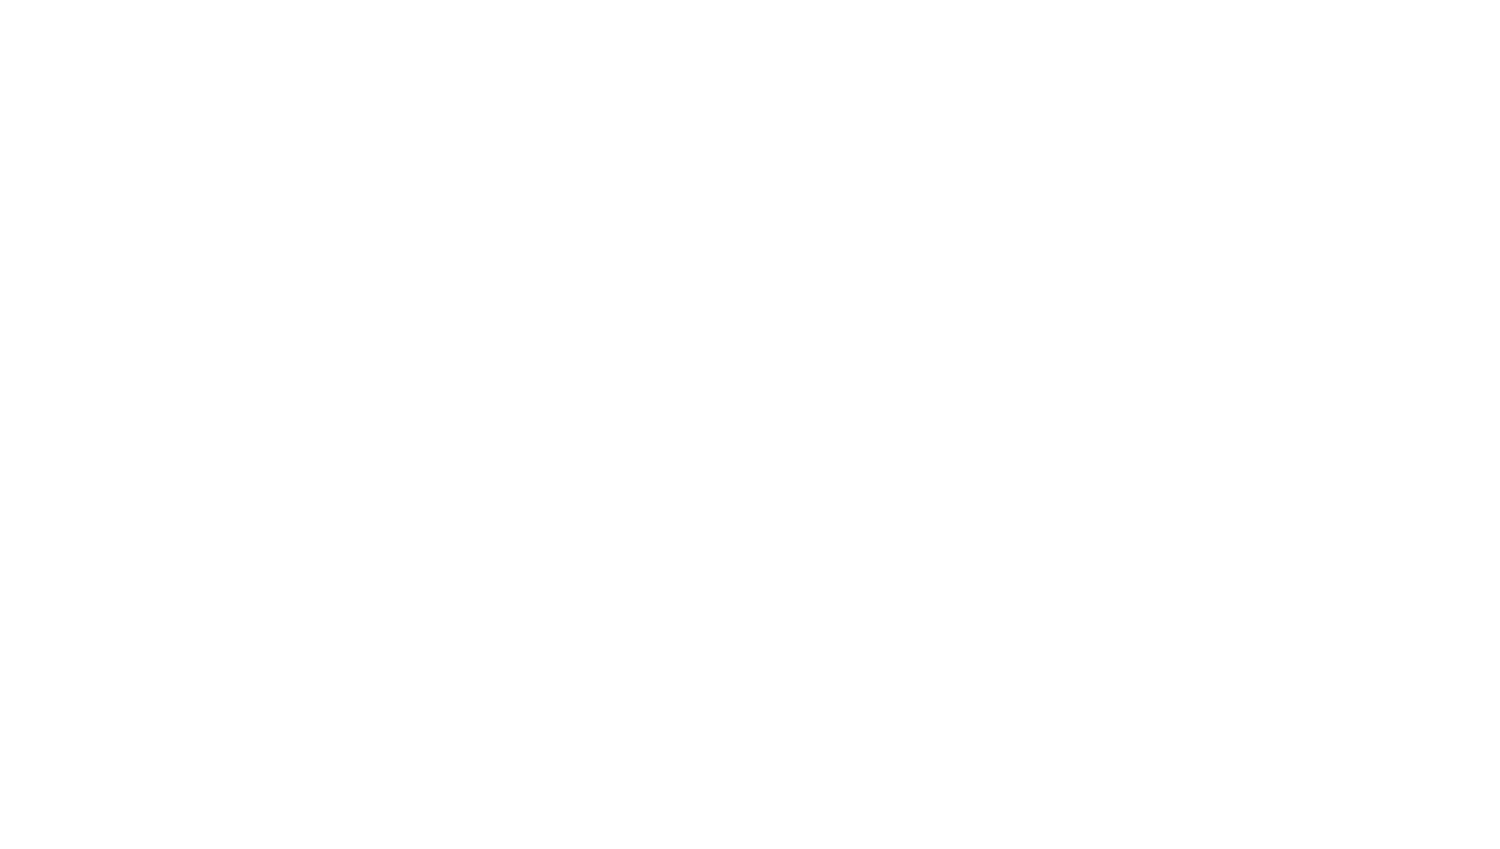 The Woodcroft Hotel